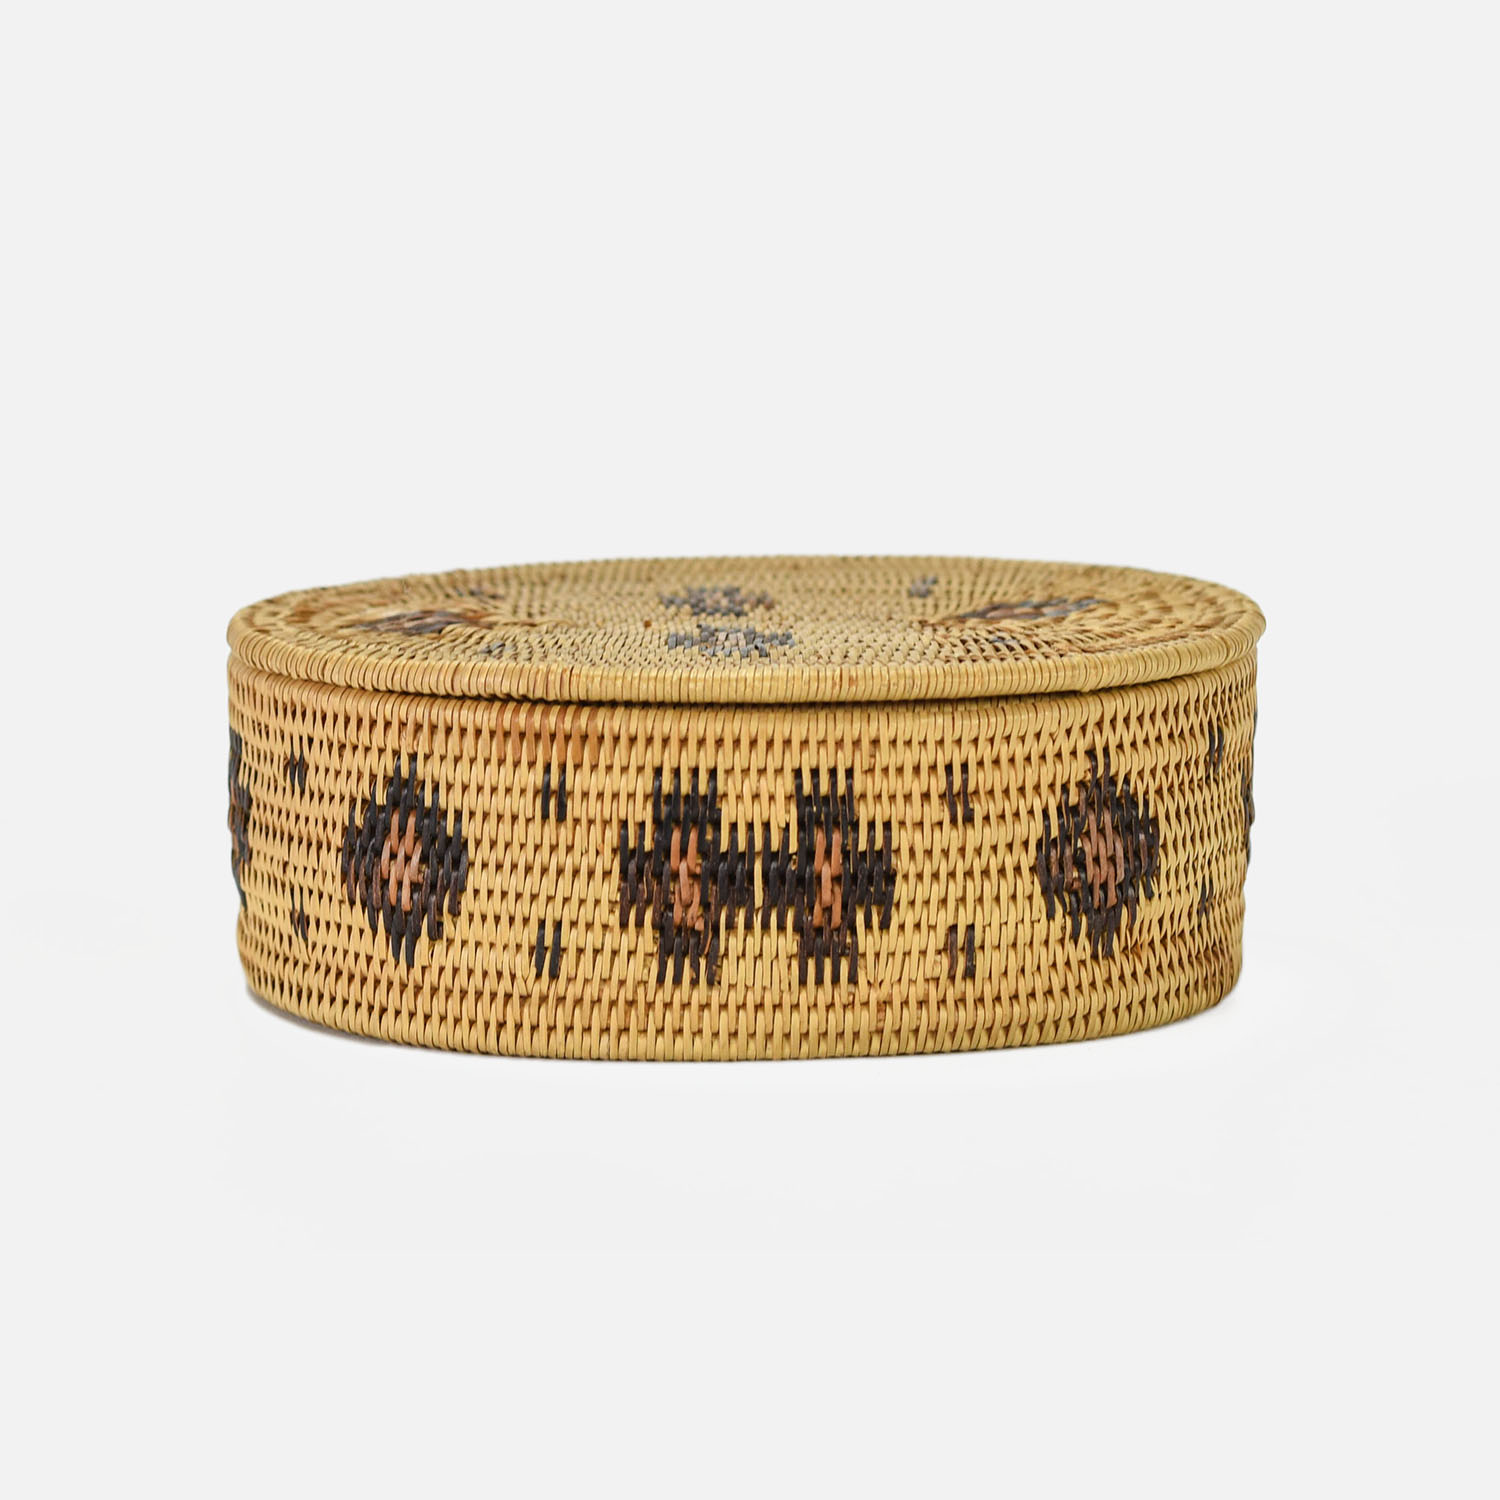 Small Native American Oval Coil Basket w/Lid #1